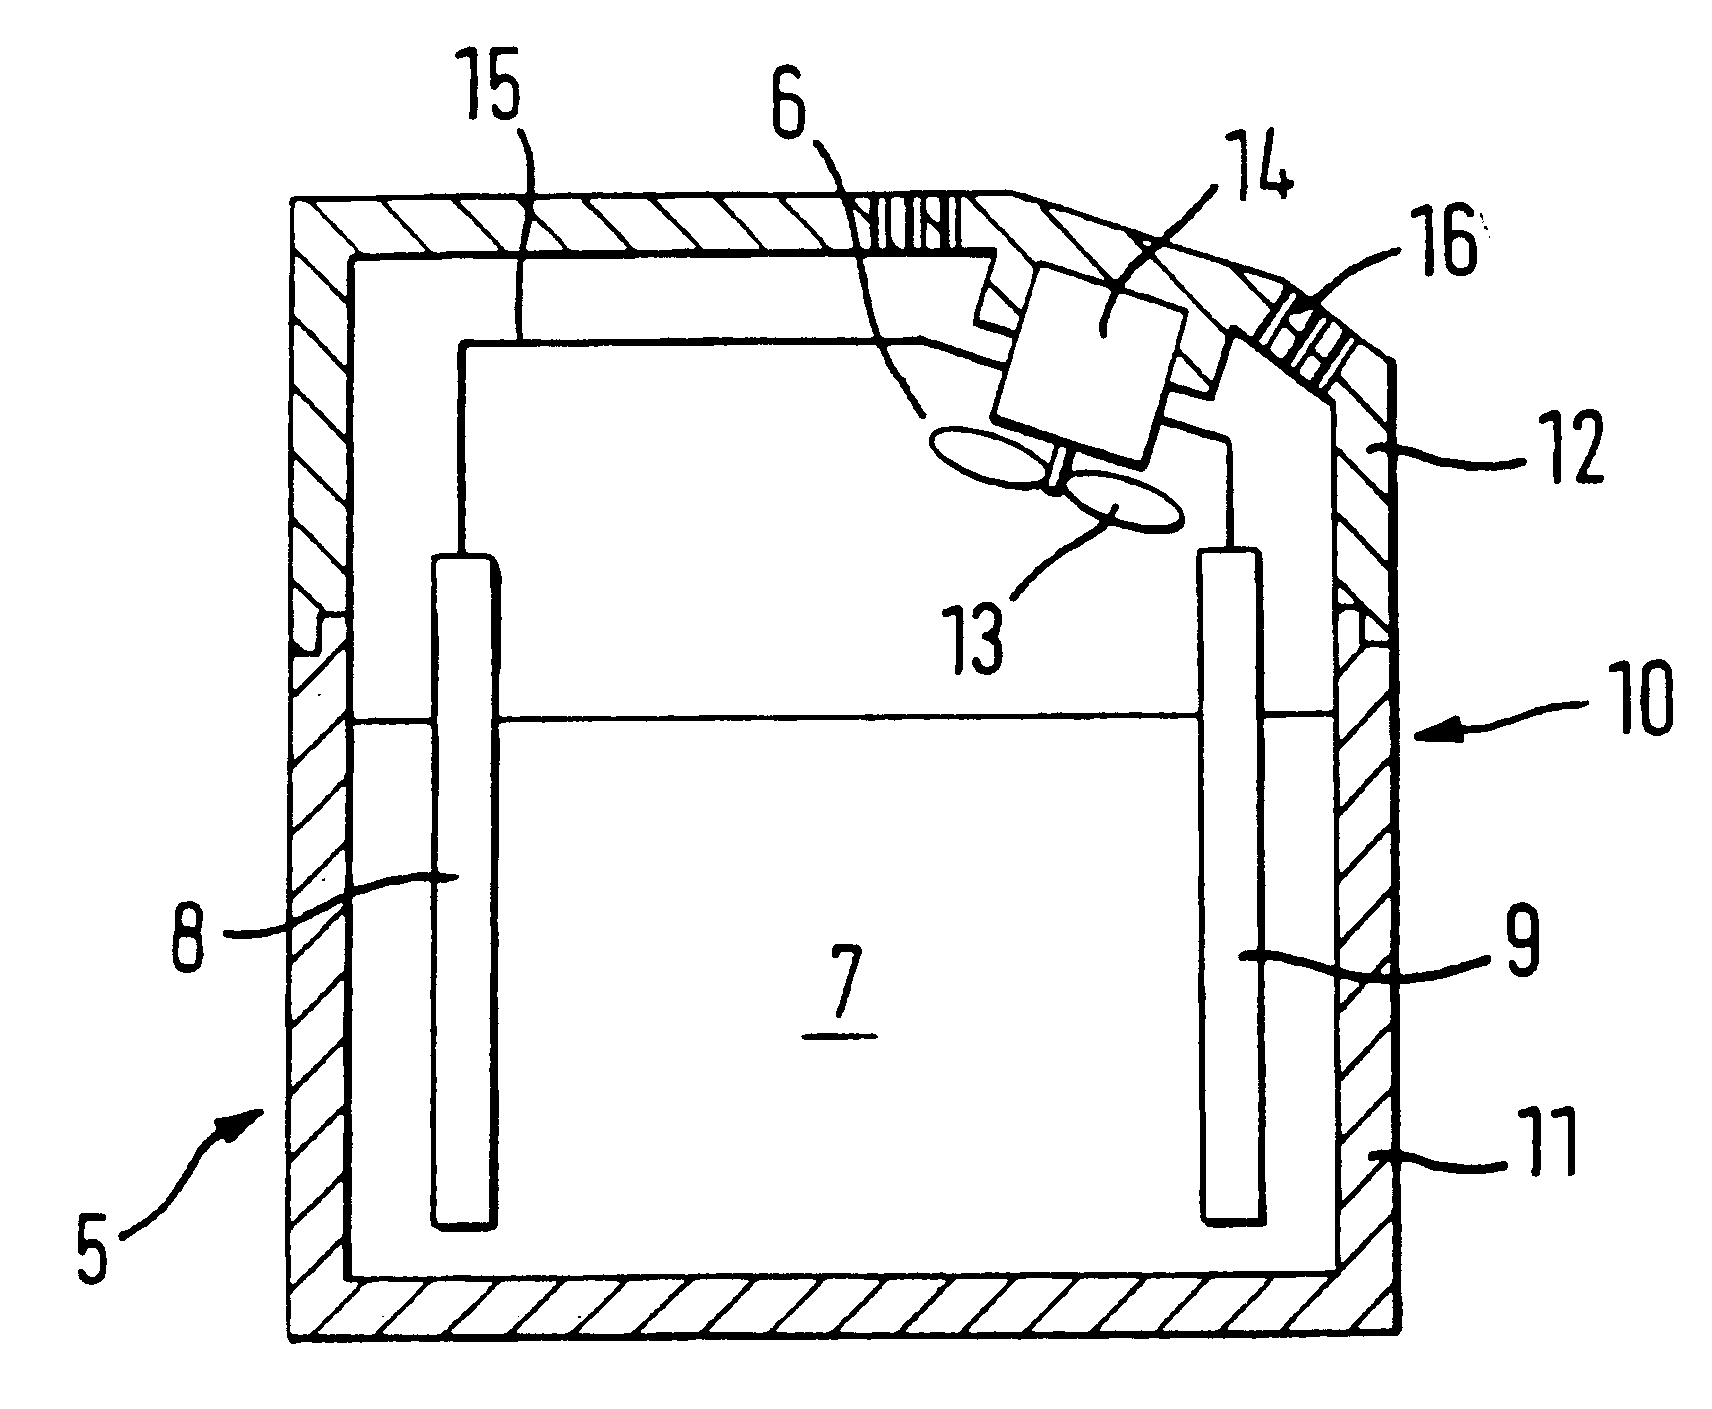 Apparatus incorporating air modifying agents